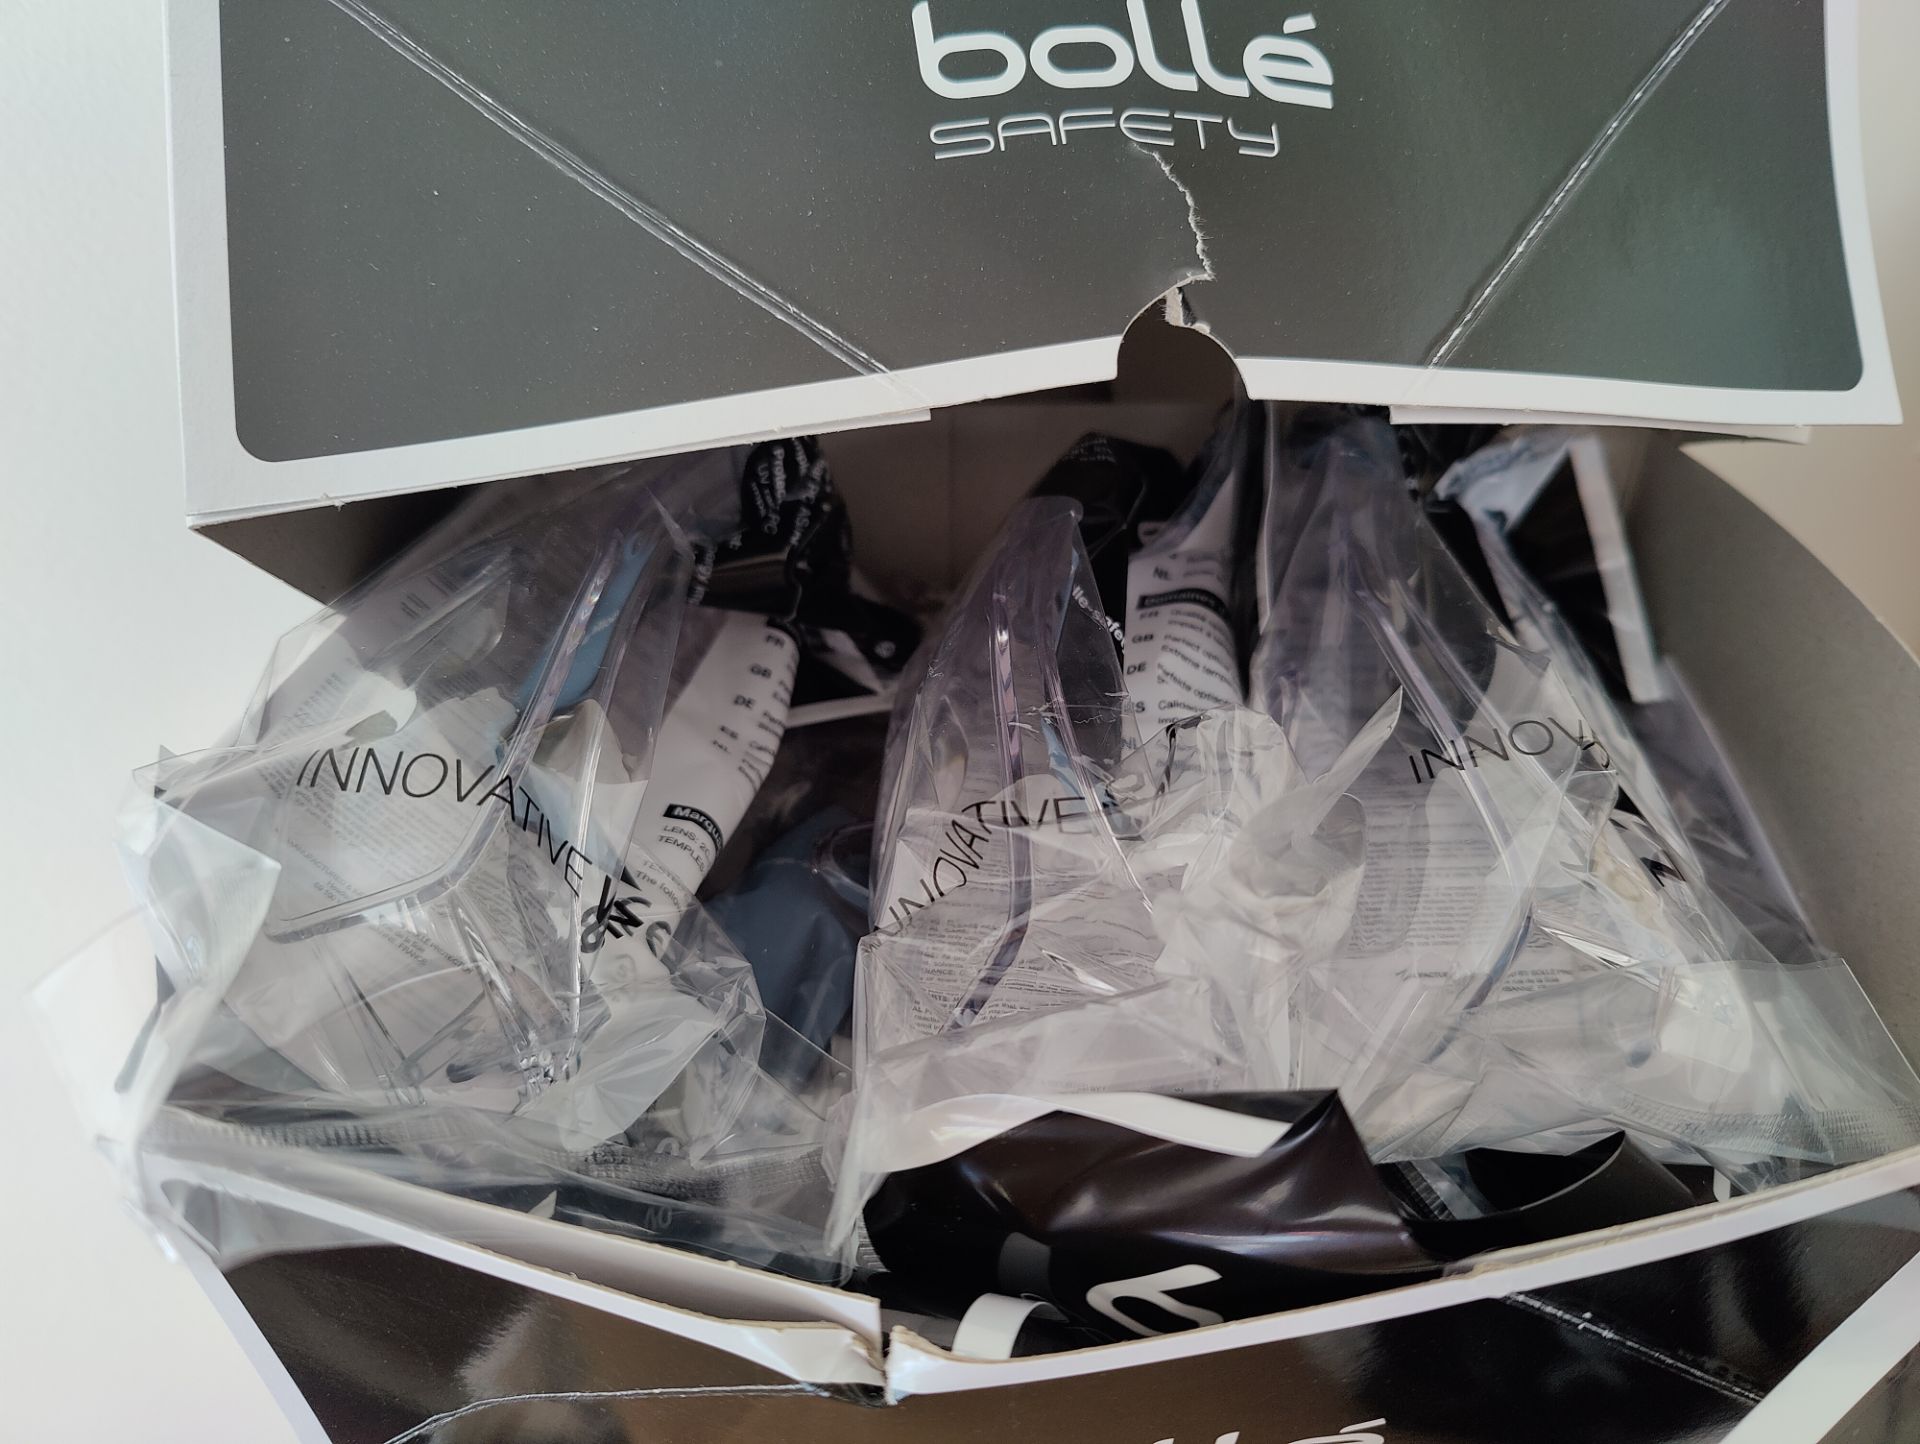 Clearance Joblot 2 x Box of 10 Bolle Safety Overlight Protective Eyewear - Image 2 of 3